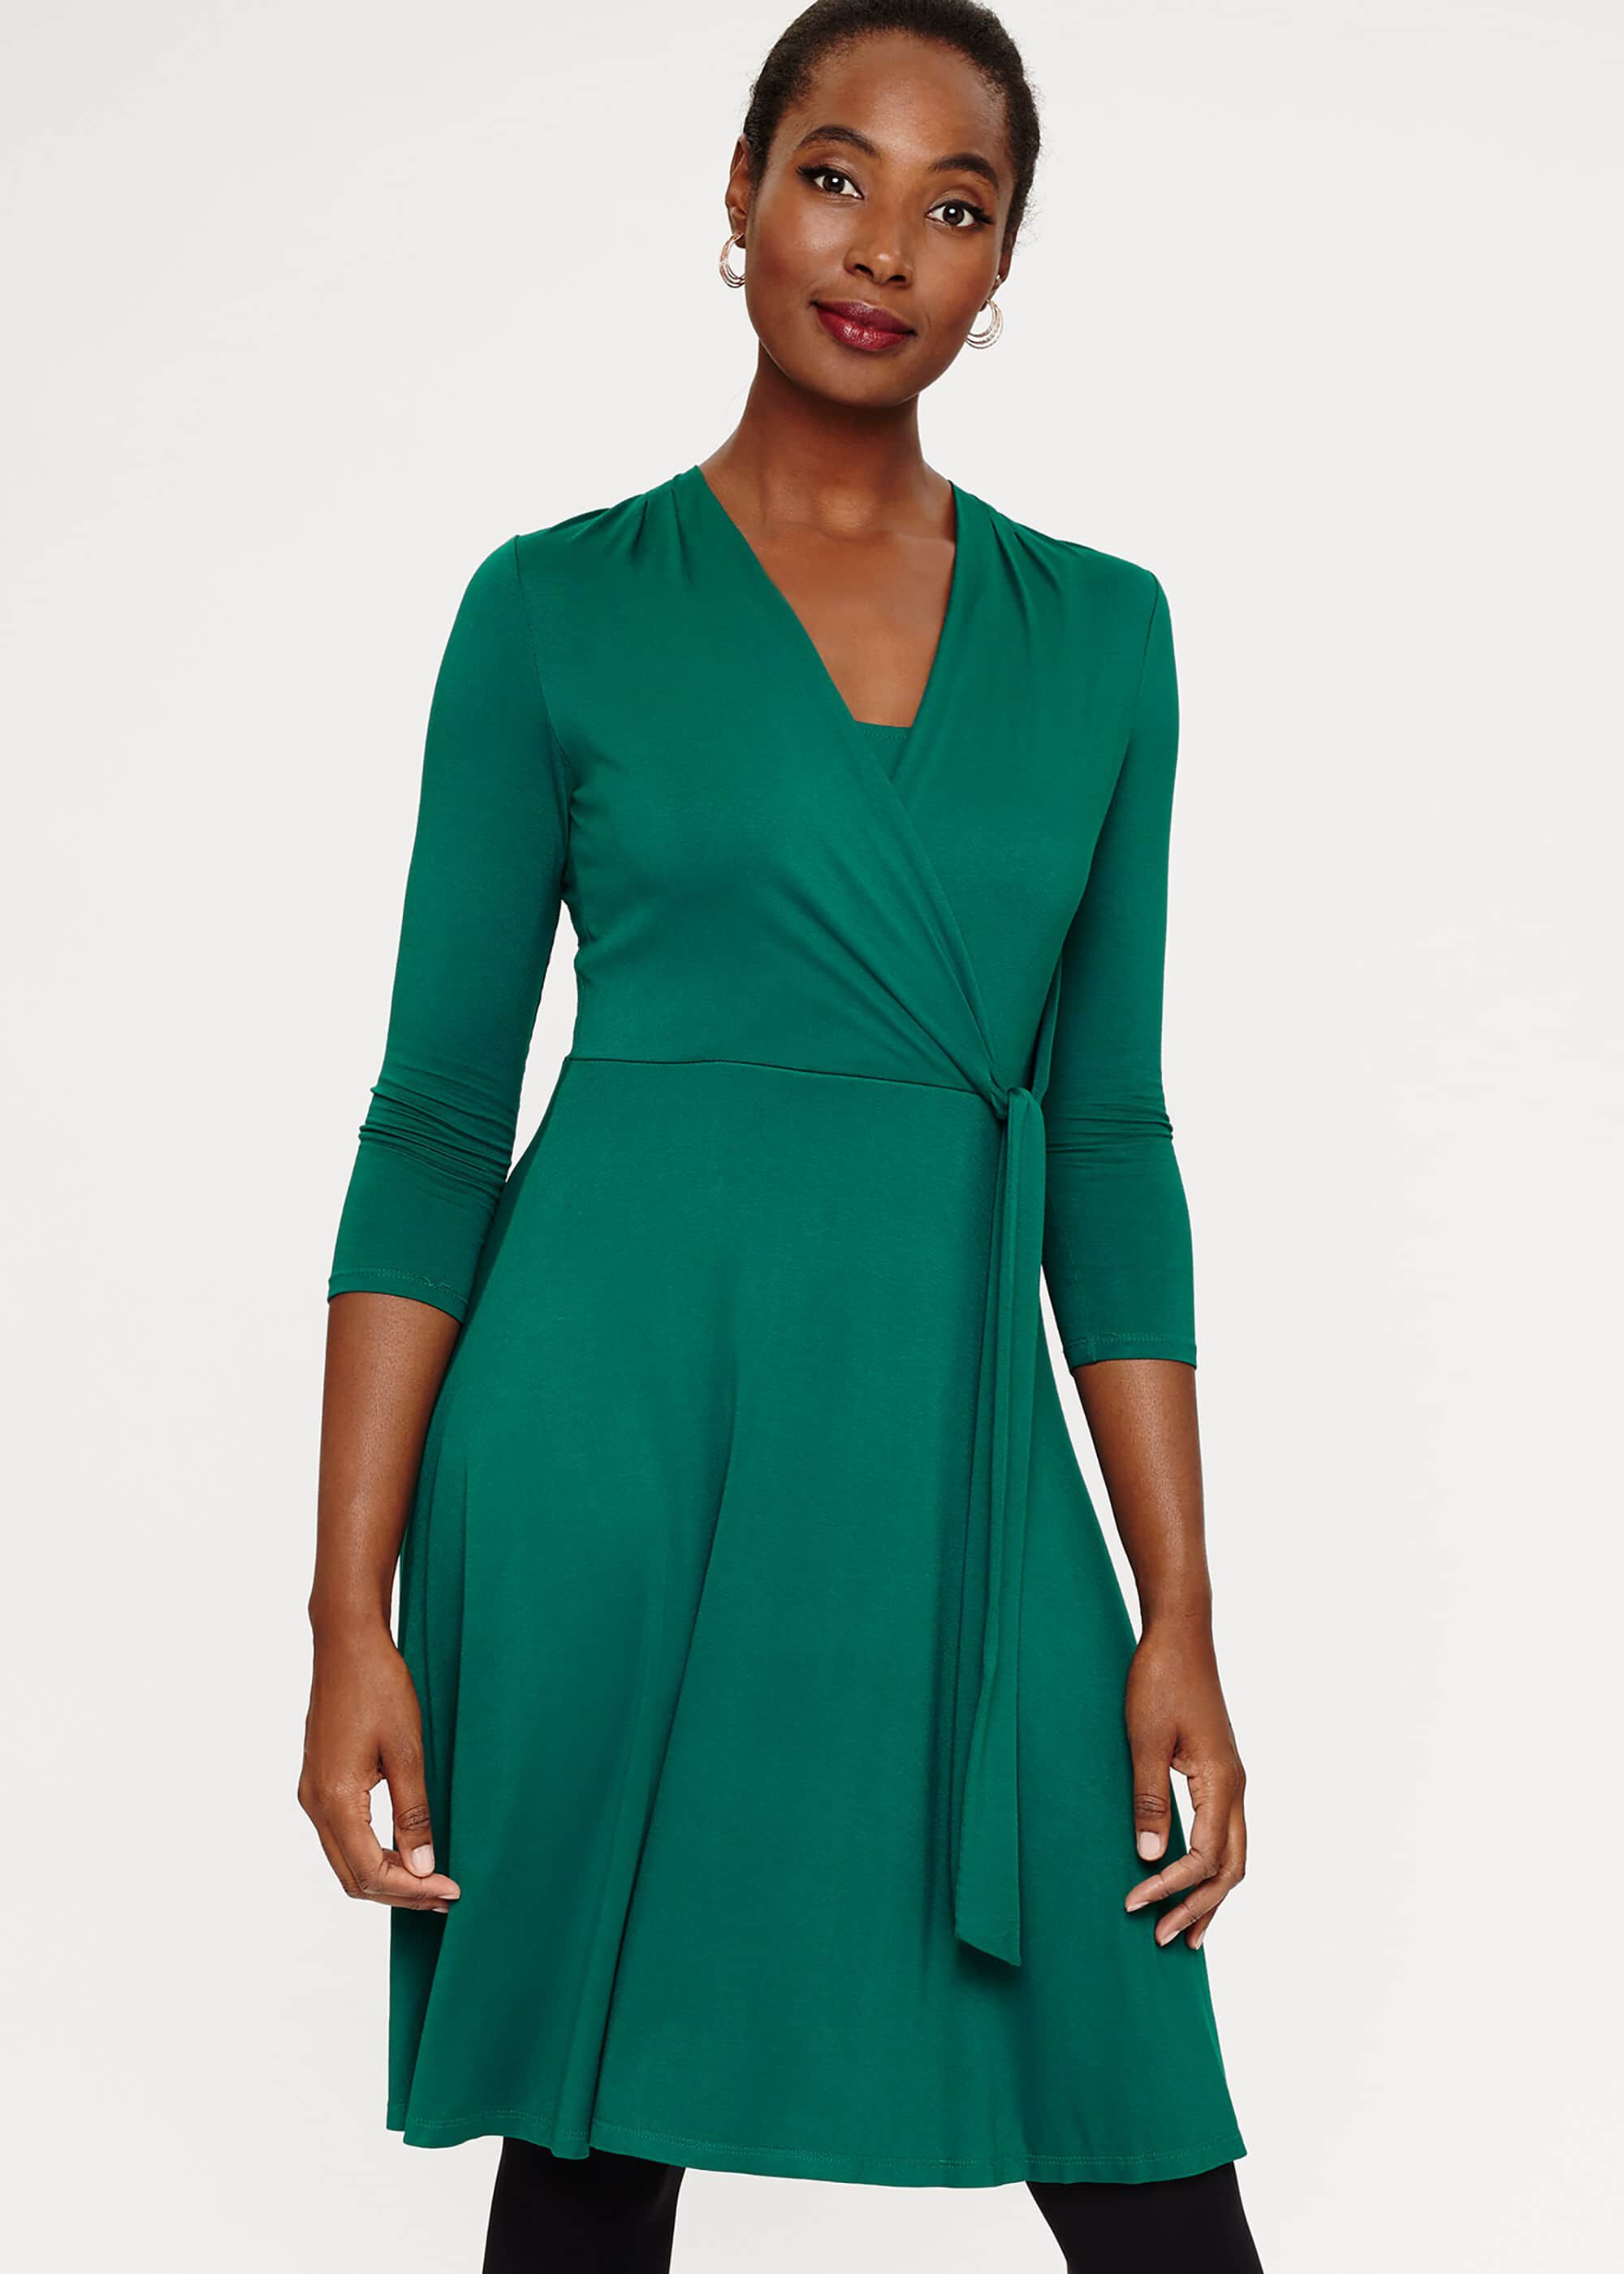 Phase Eight Green Wrap Dress Hotsell ...